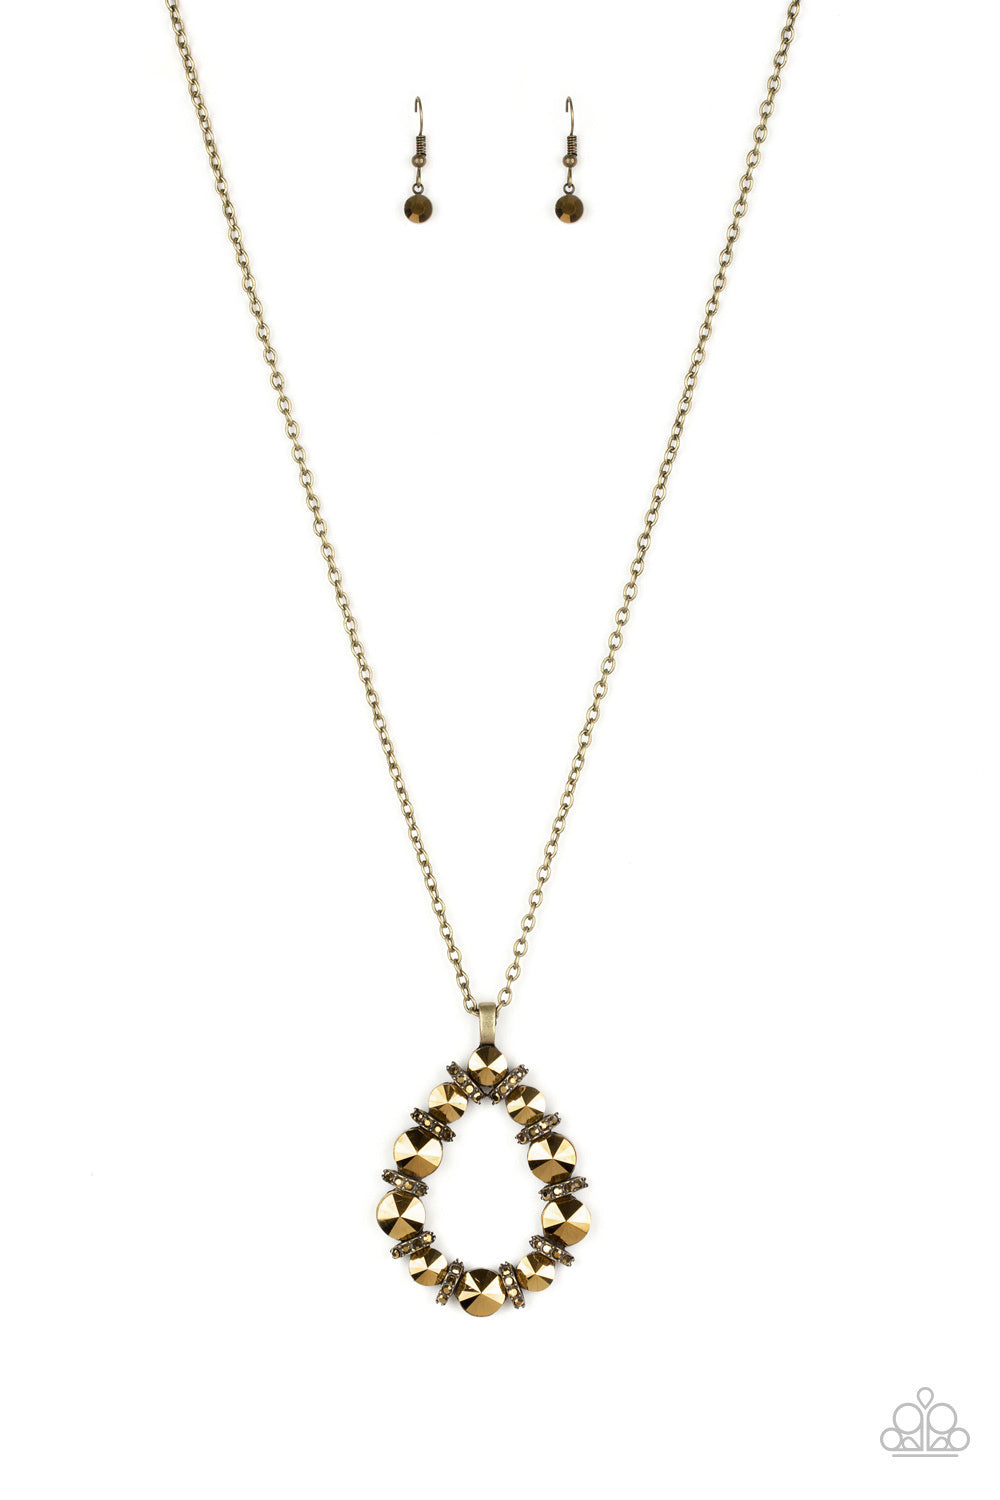 Paparazzi Accessories Making Millions - Brass Necklaces - Lady T Accessories